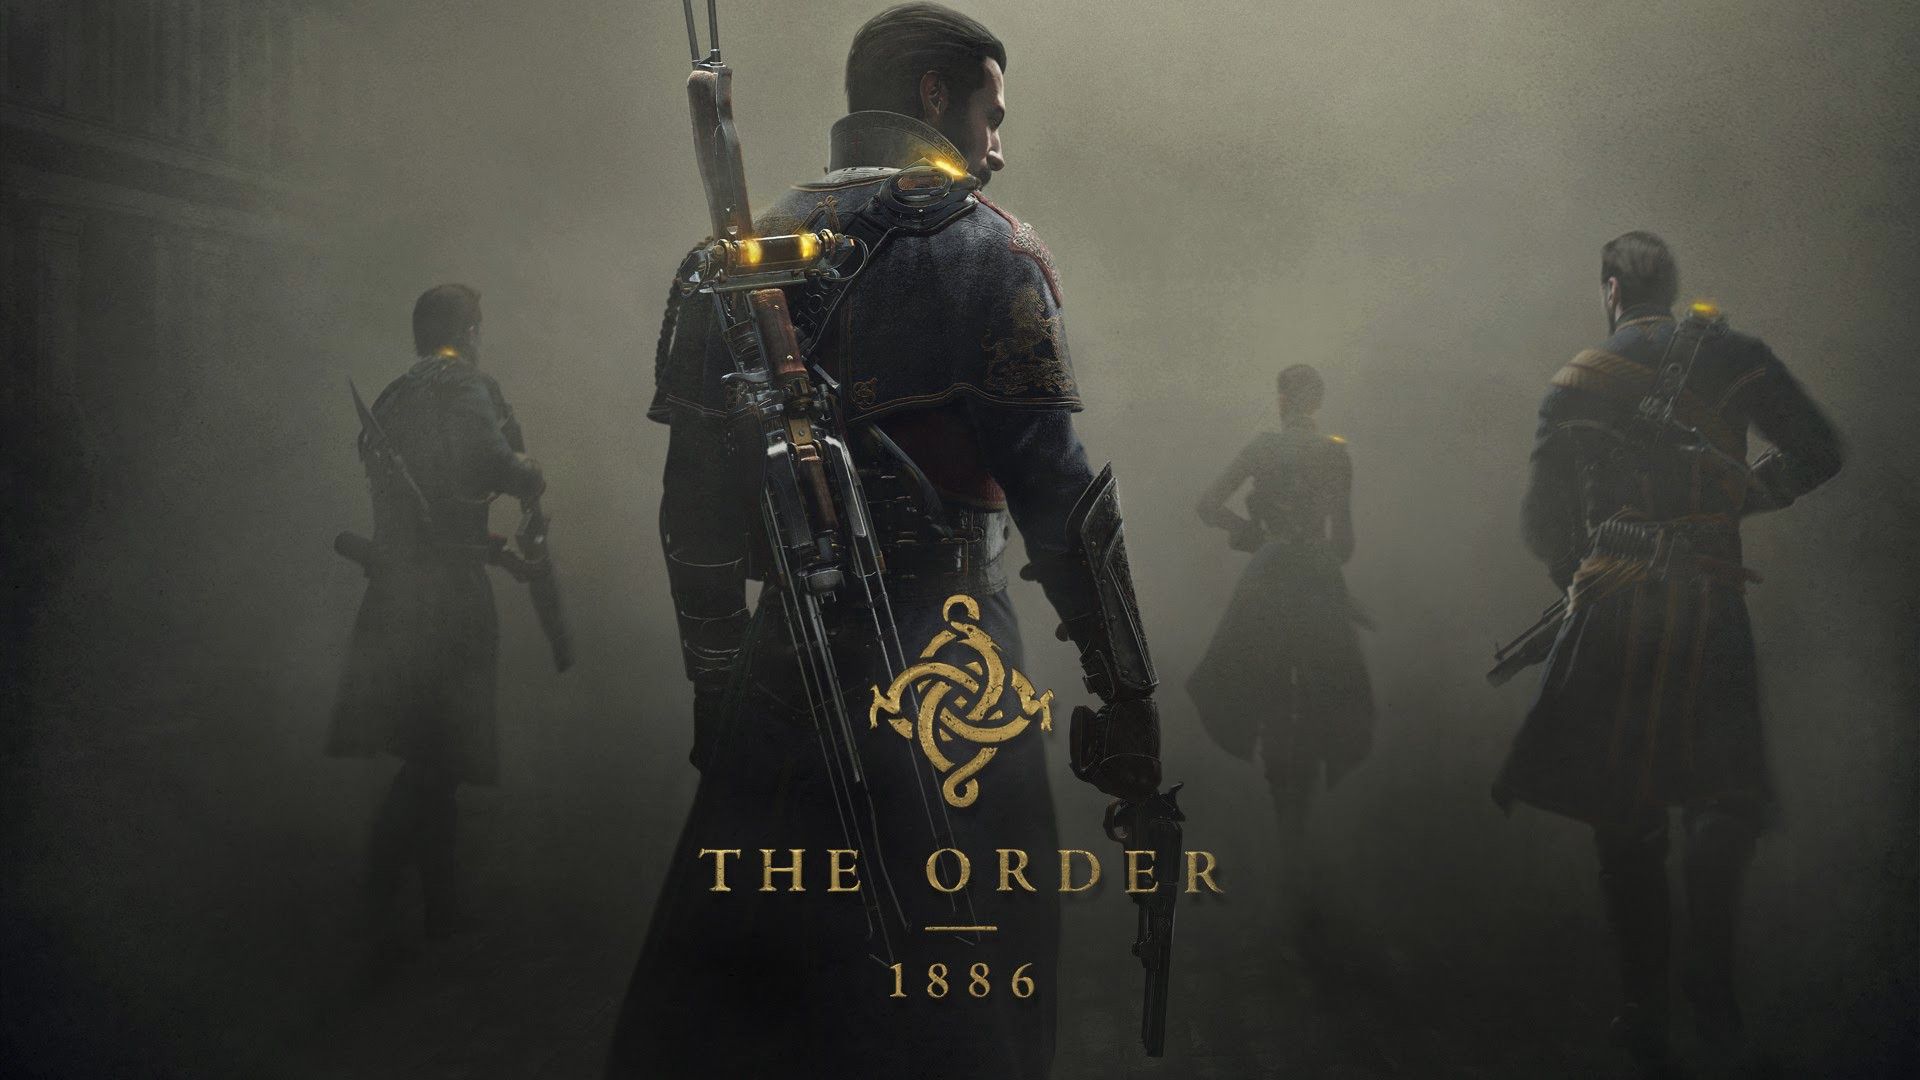 The Order Wallpapers